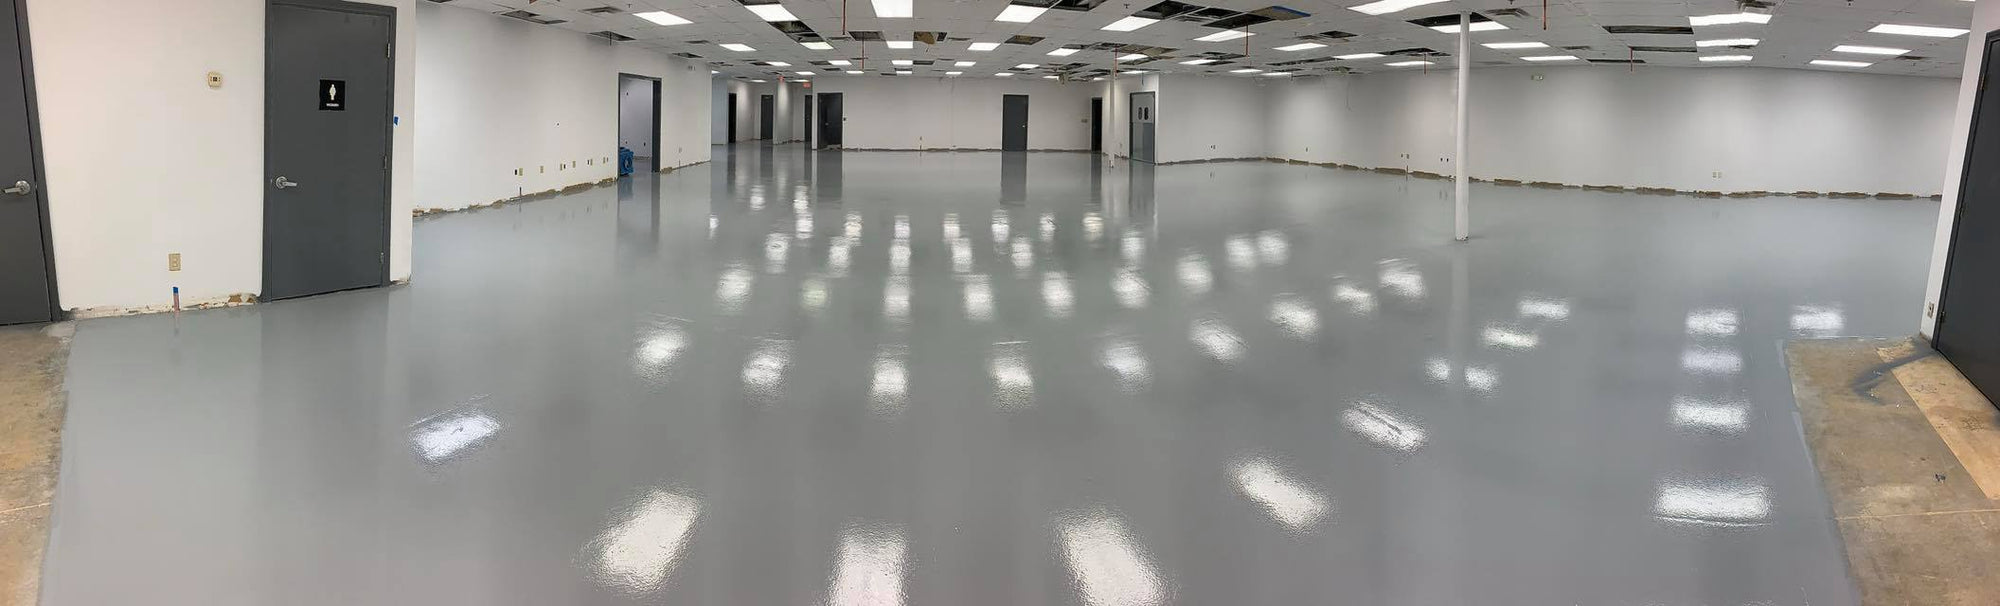 polyaspartic flooring resin offices and retail flooring